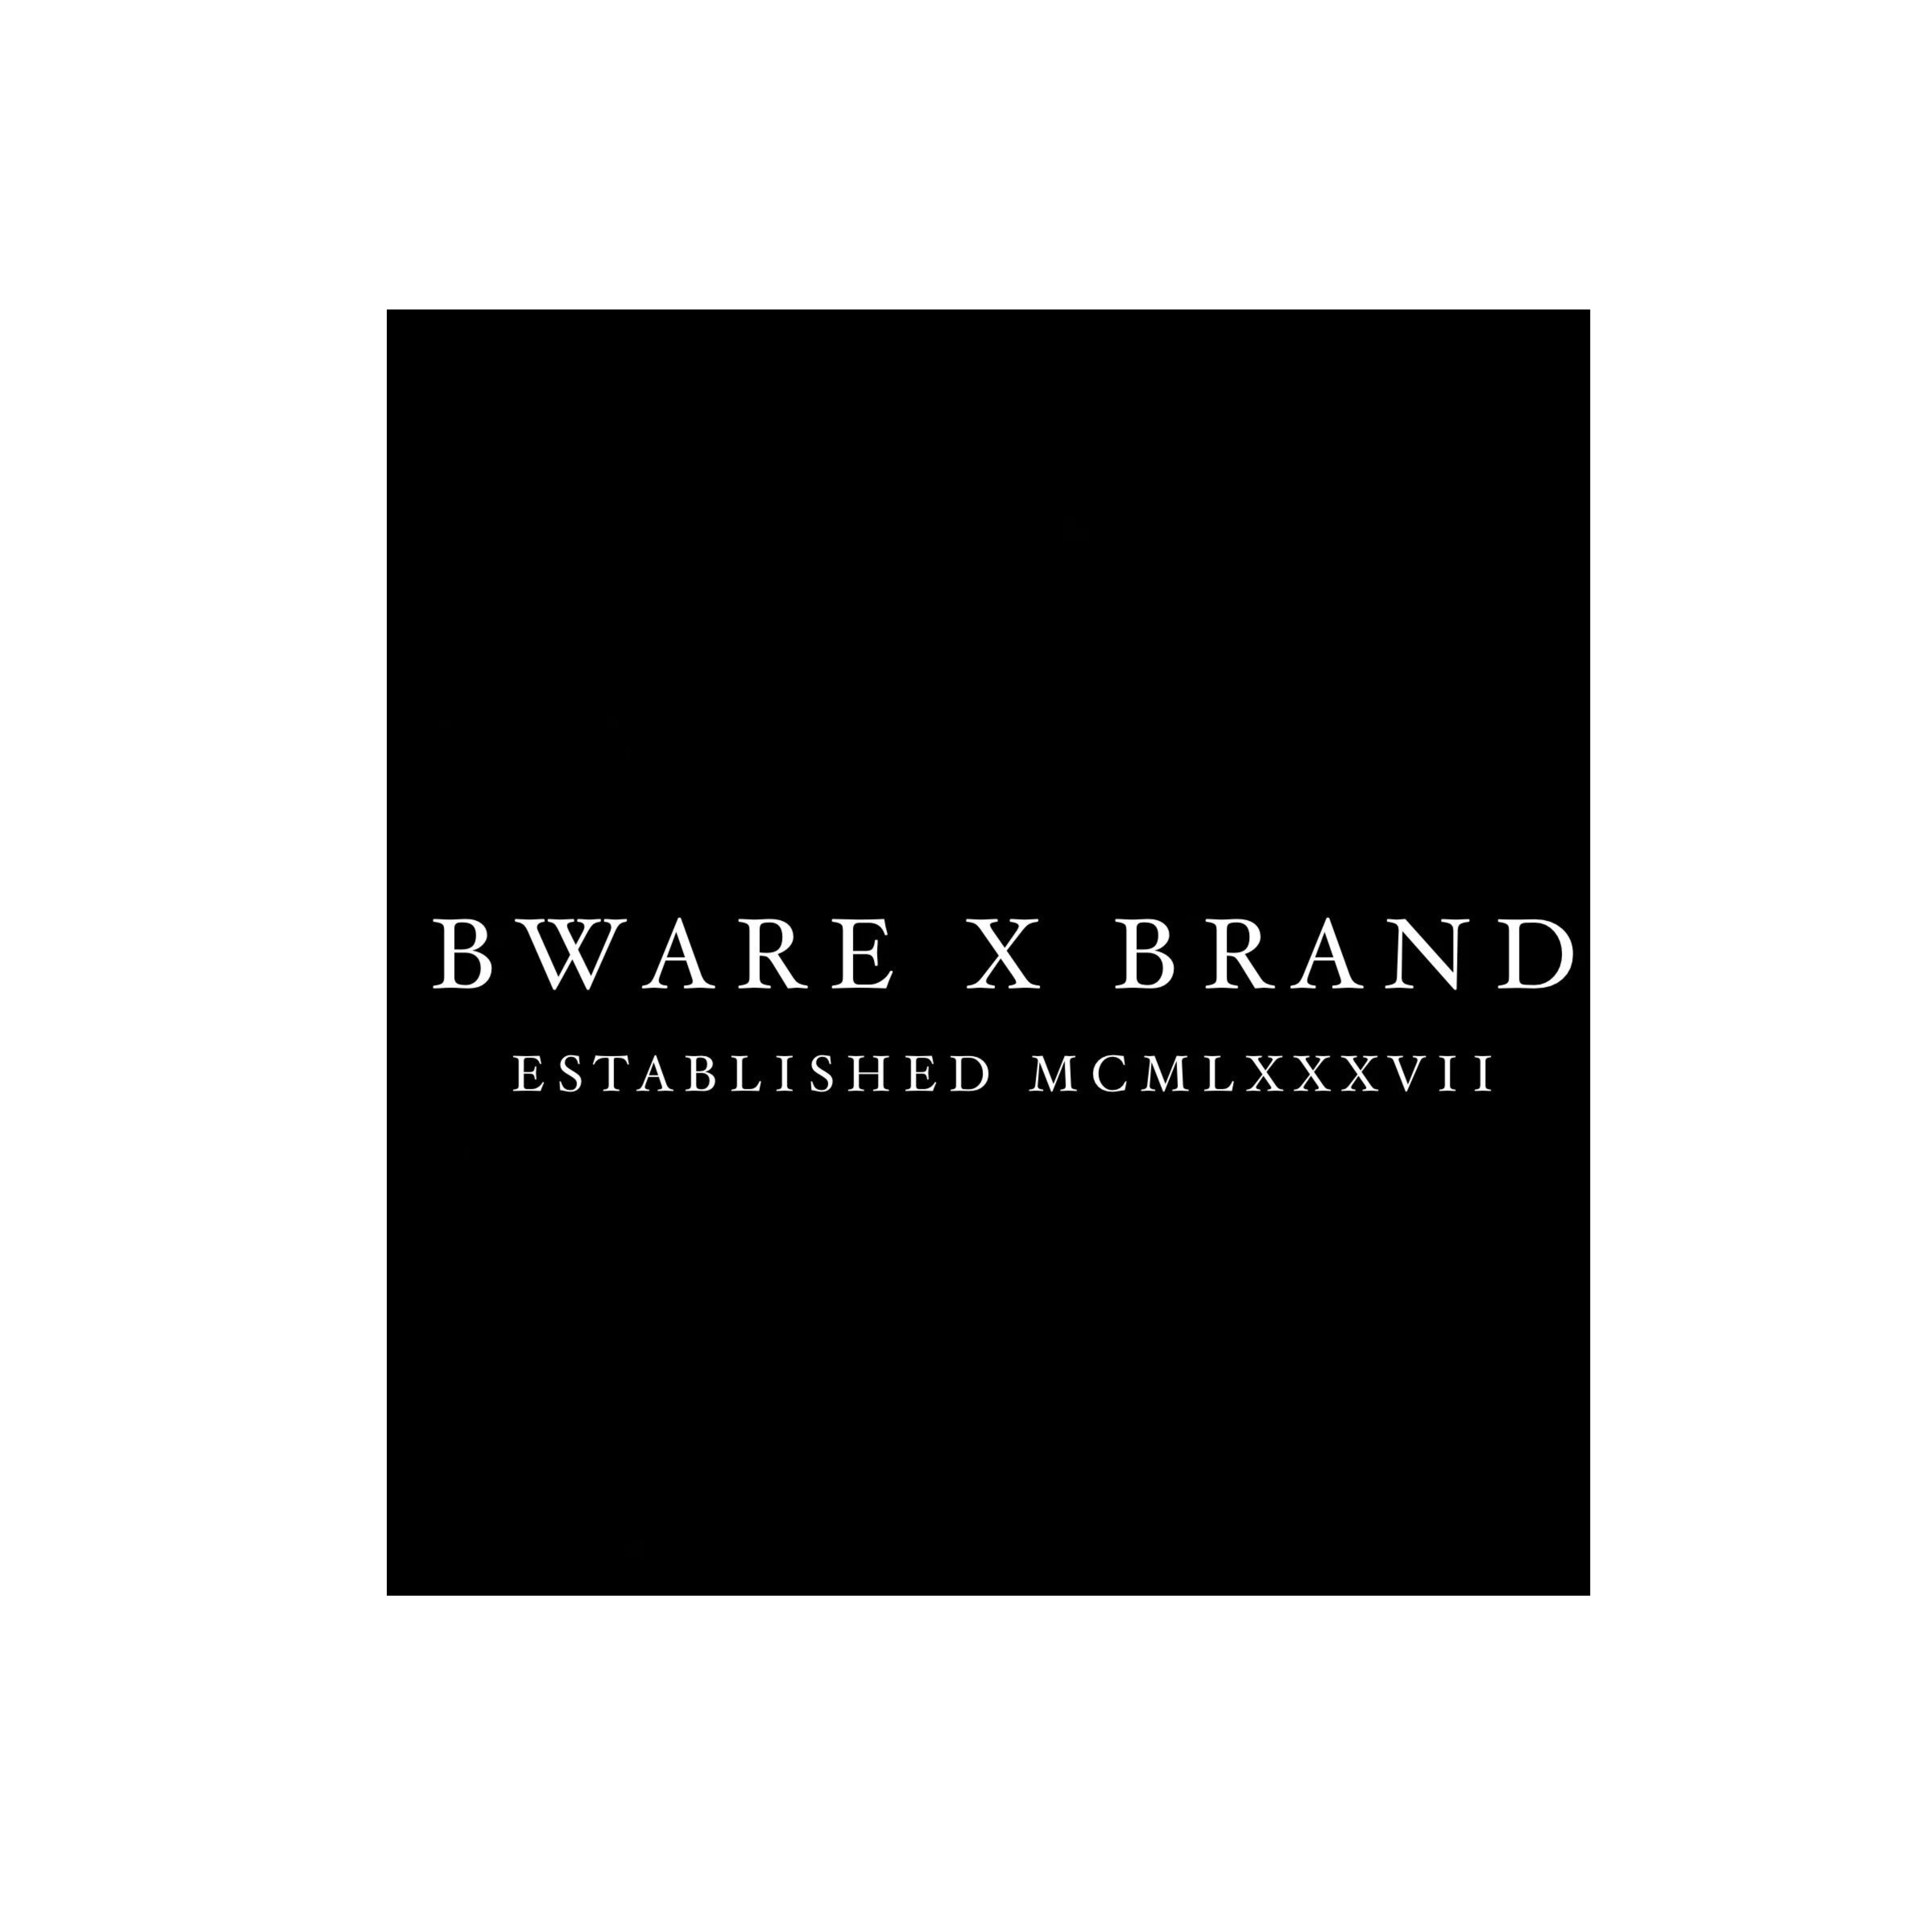 BWARE X BRAND GIFT CARD